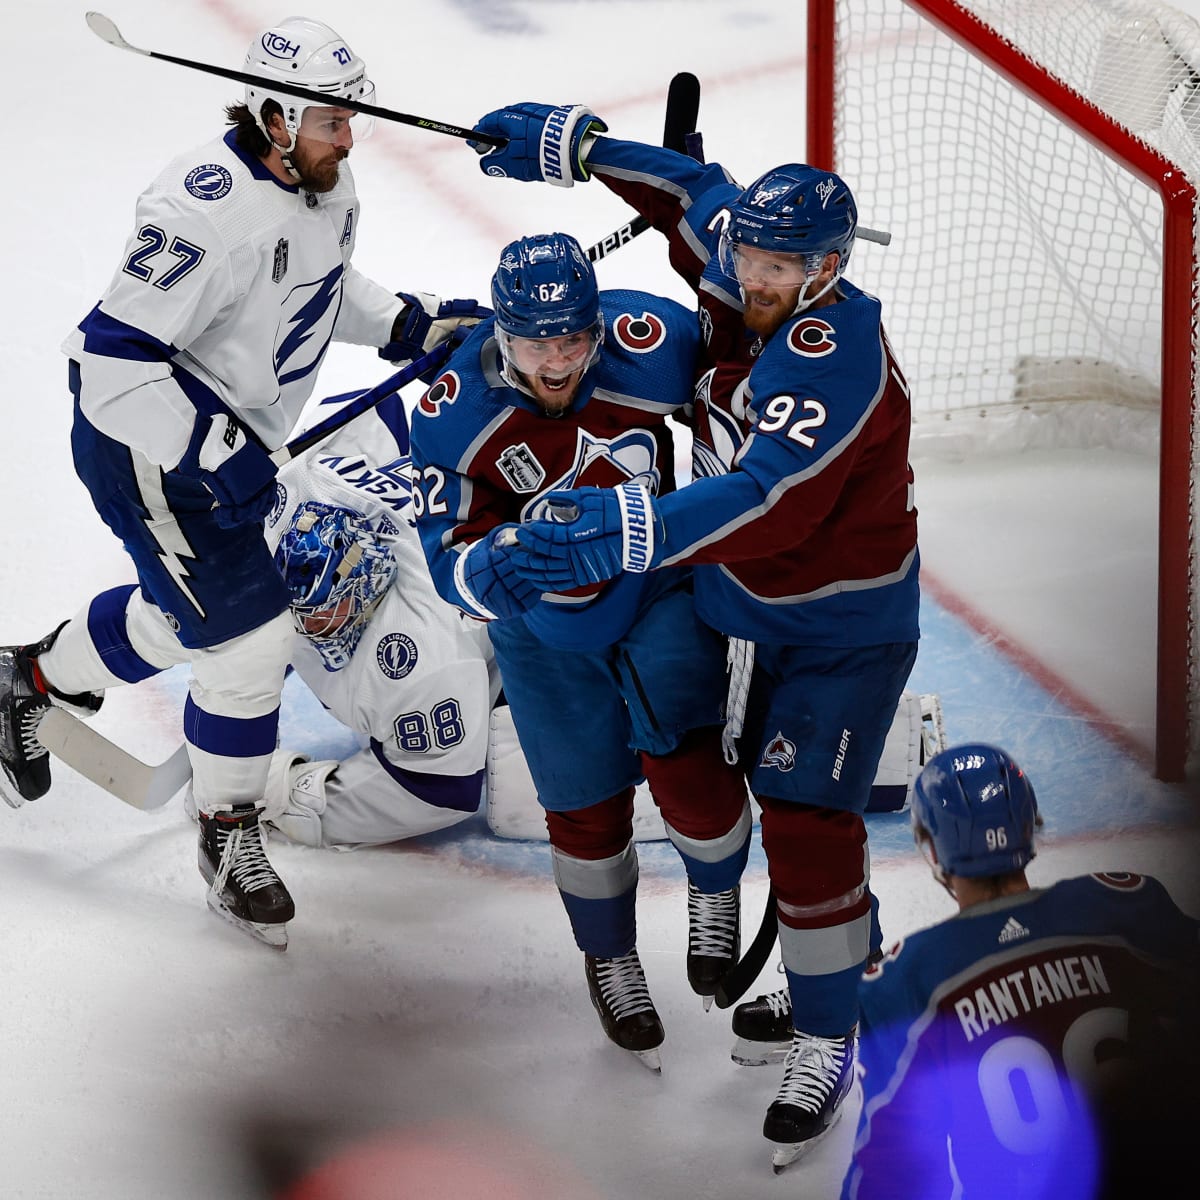 Colorado Avalanche win Game 1 of Stanley Cup Final in overtime